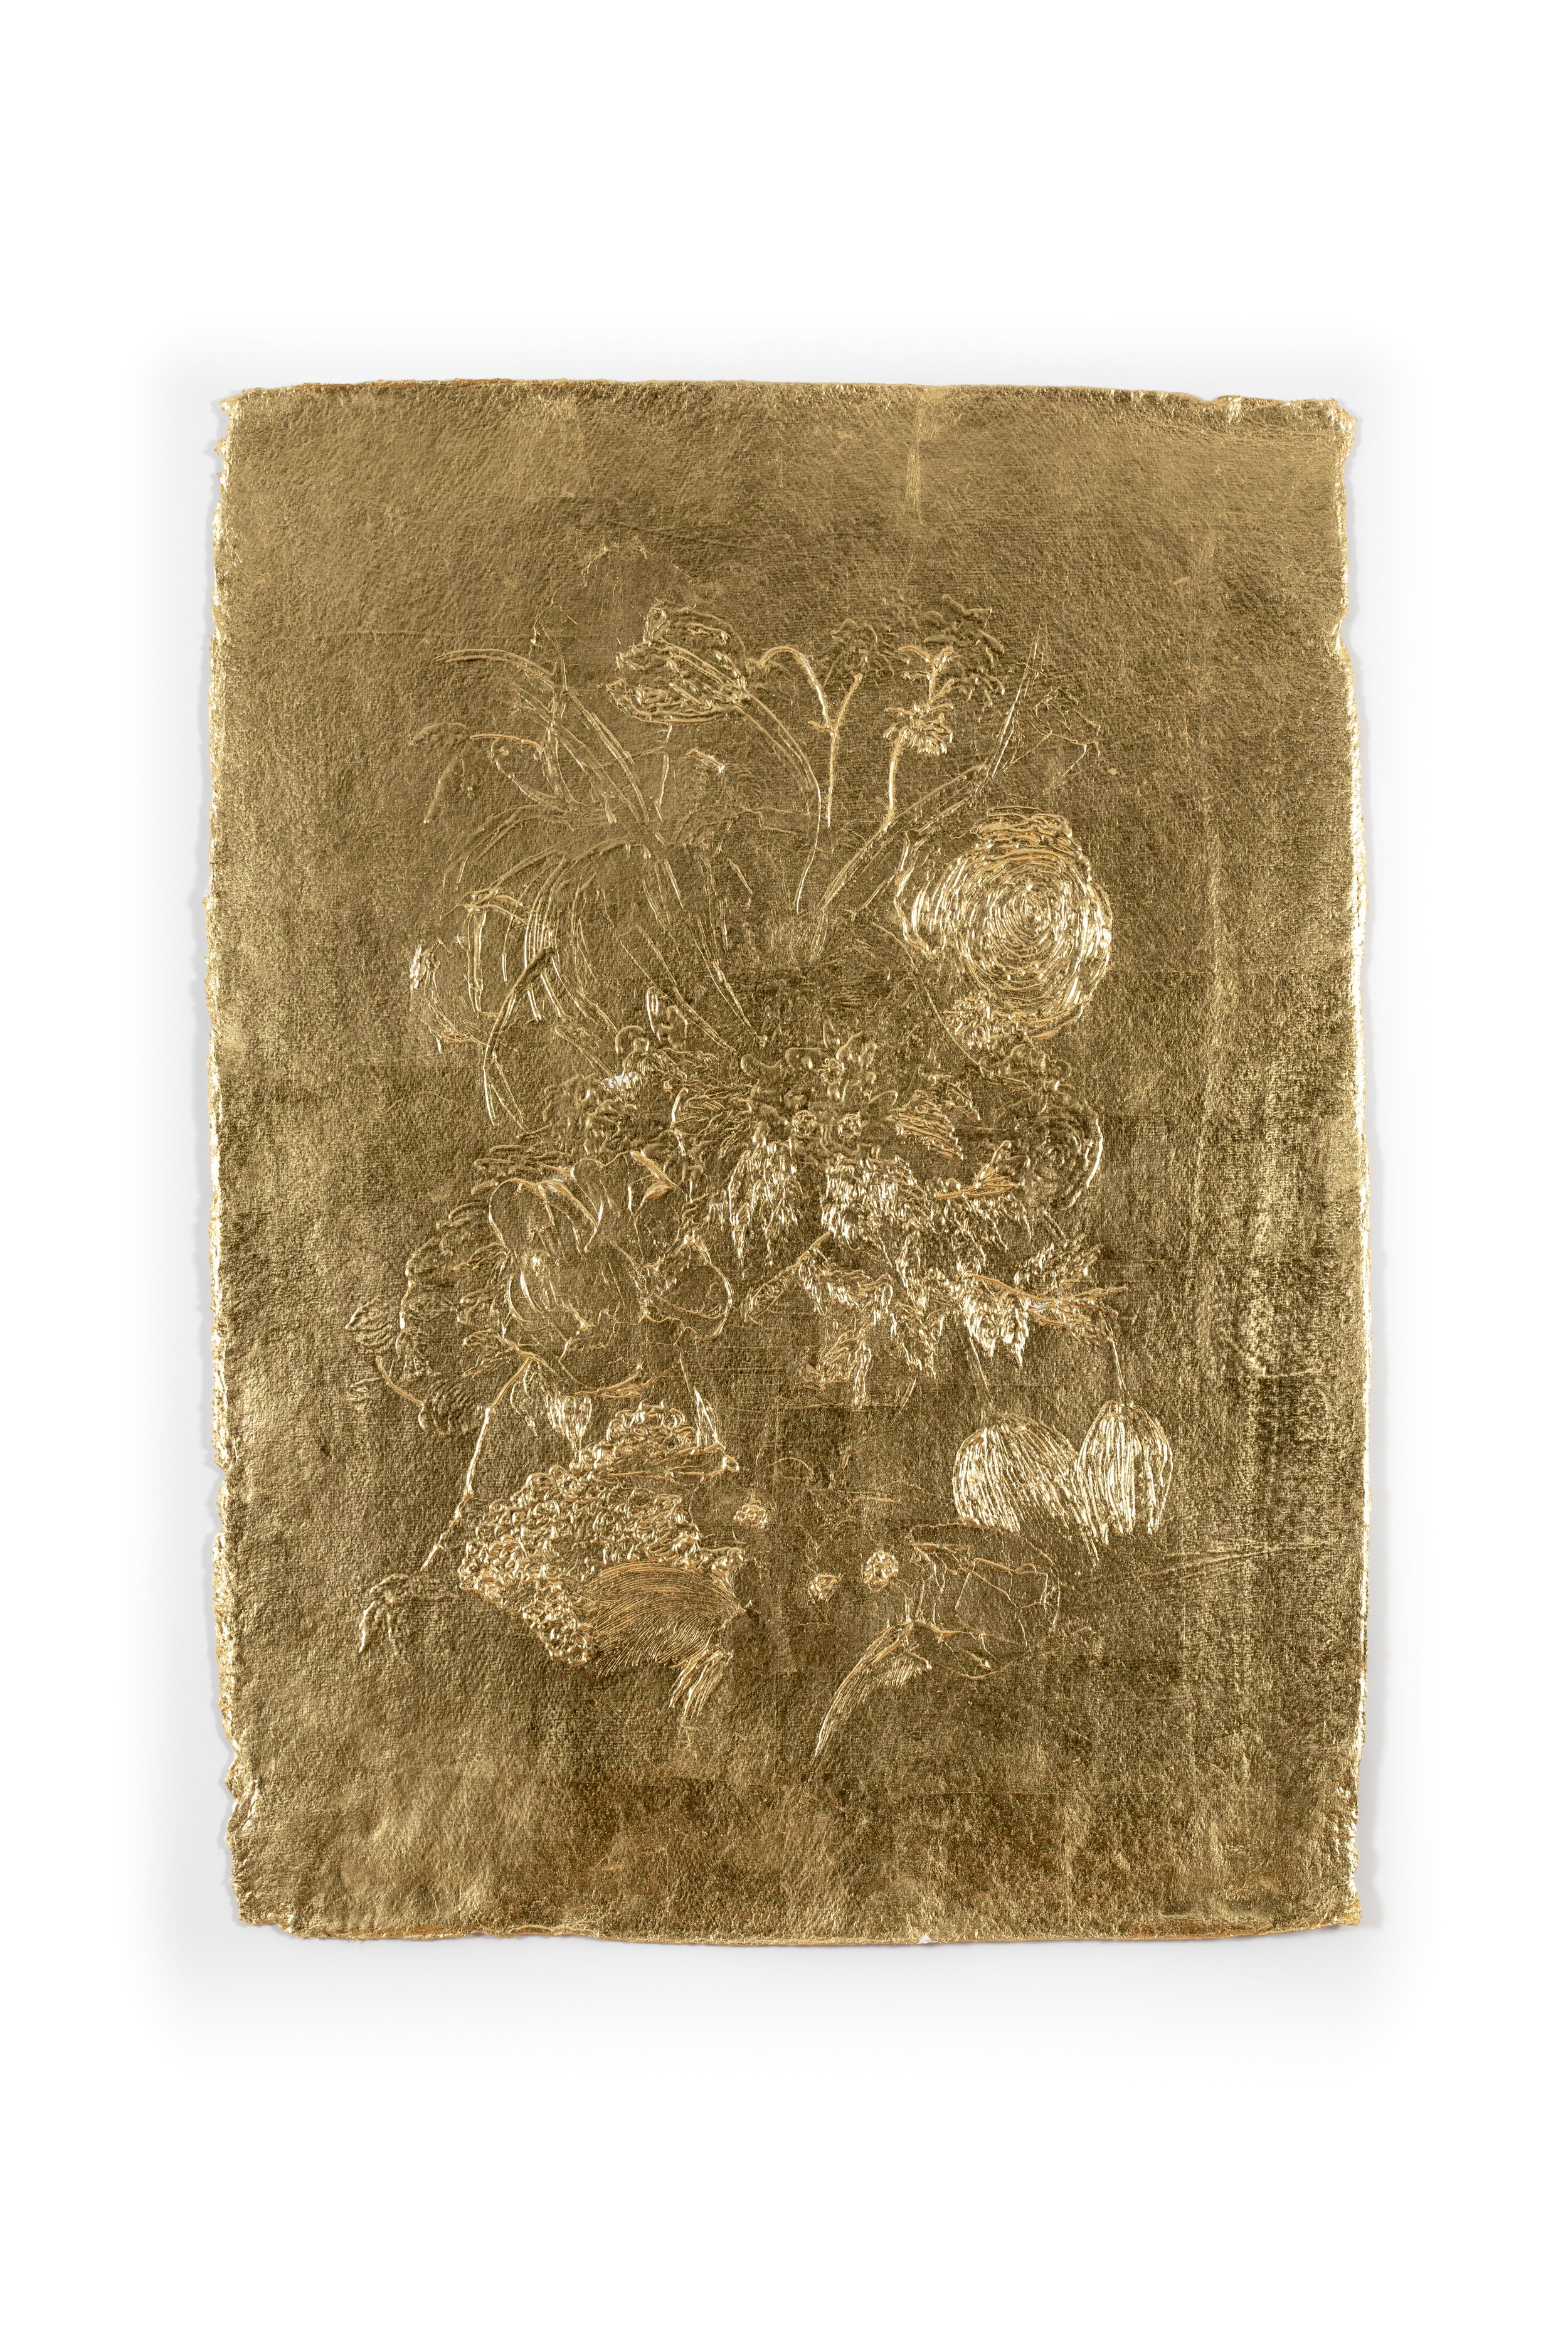   Untitled (Floral Relief 1828),  2022, 22-karat gold leaf on handmade paper, 30 x 22 inches 